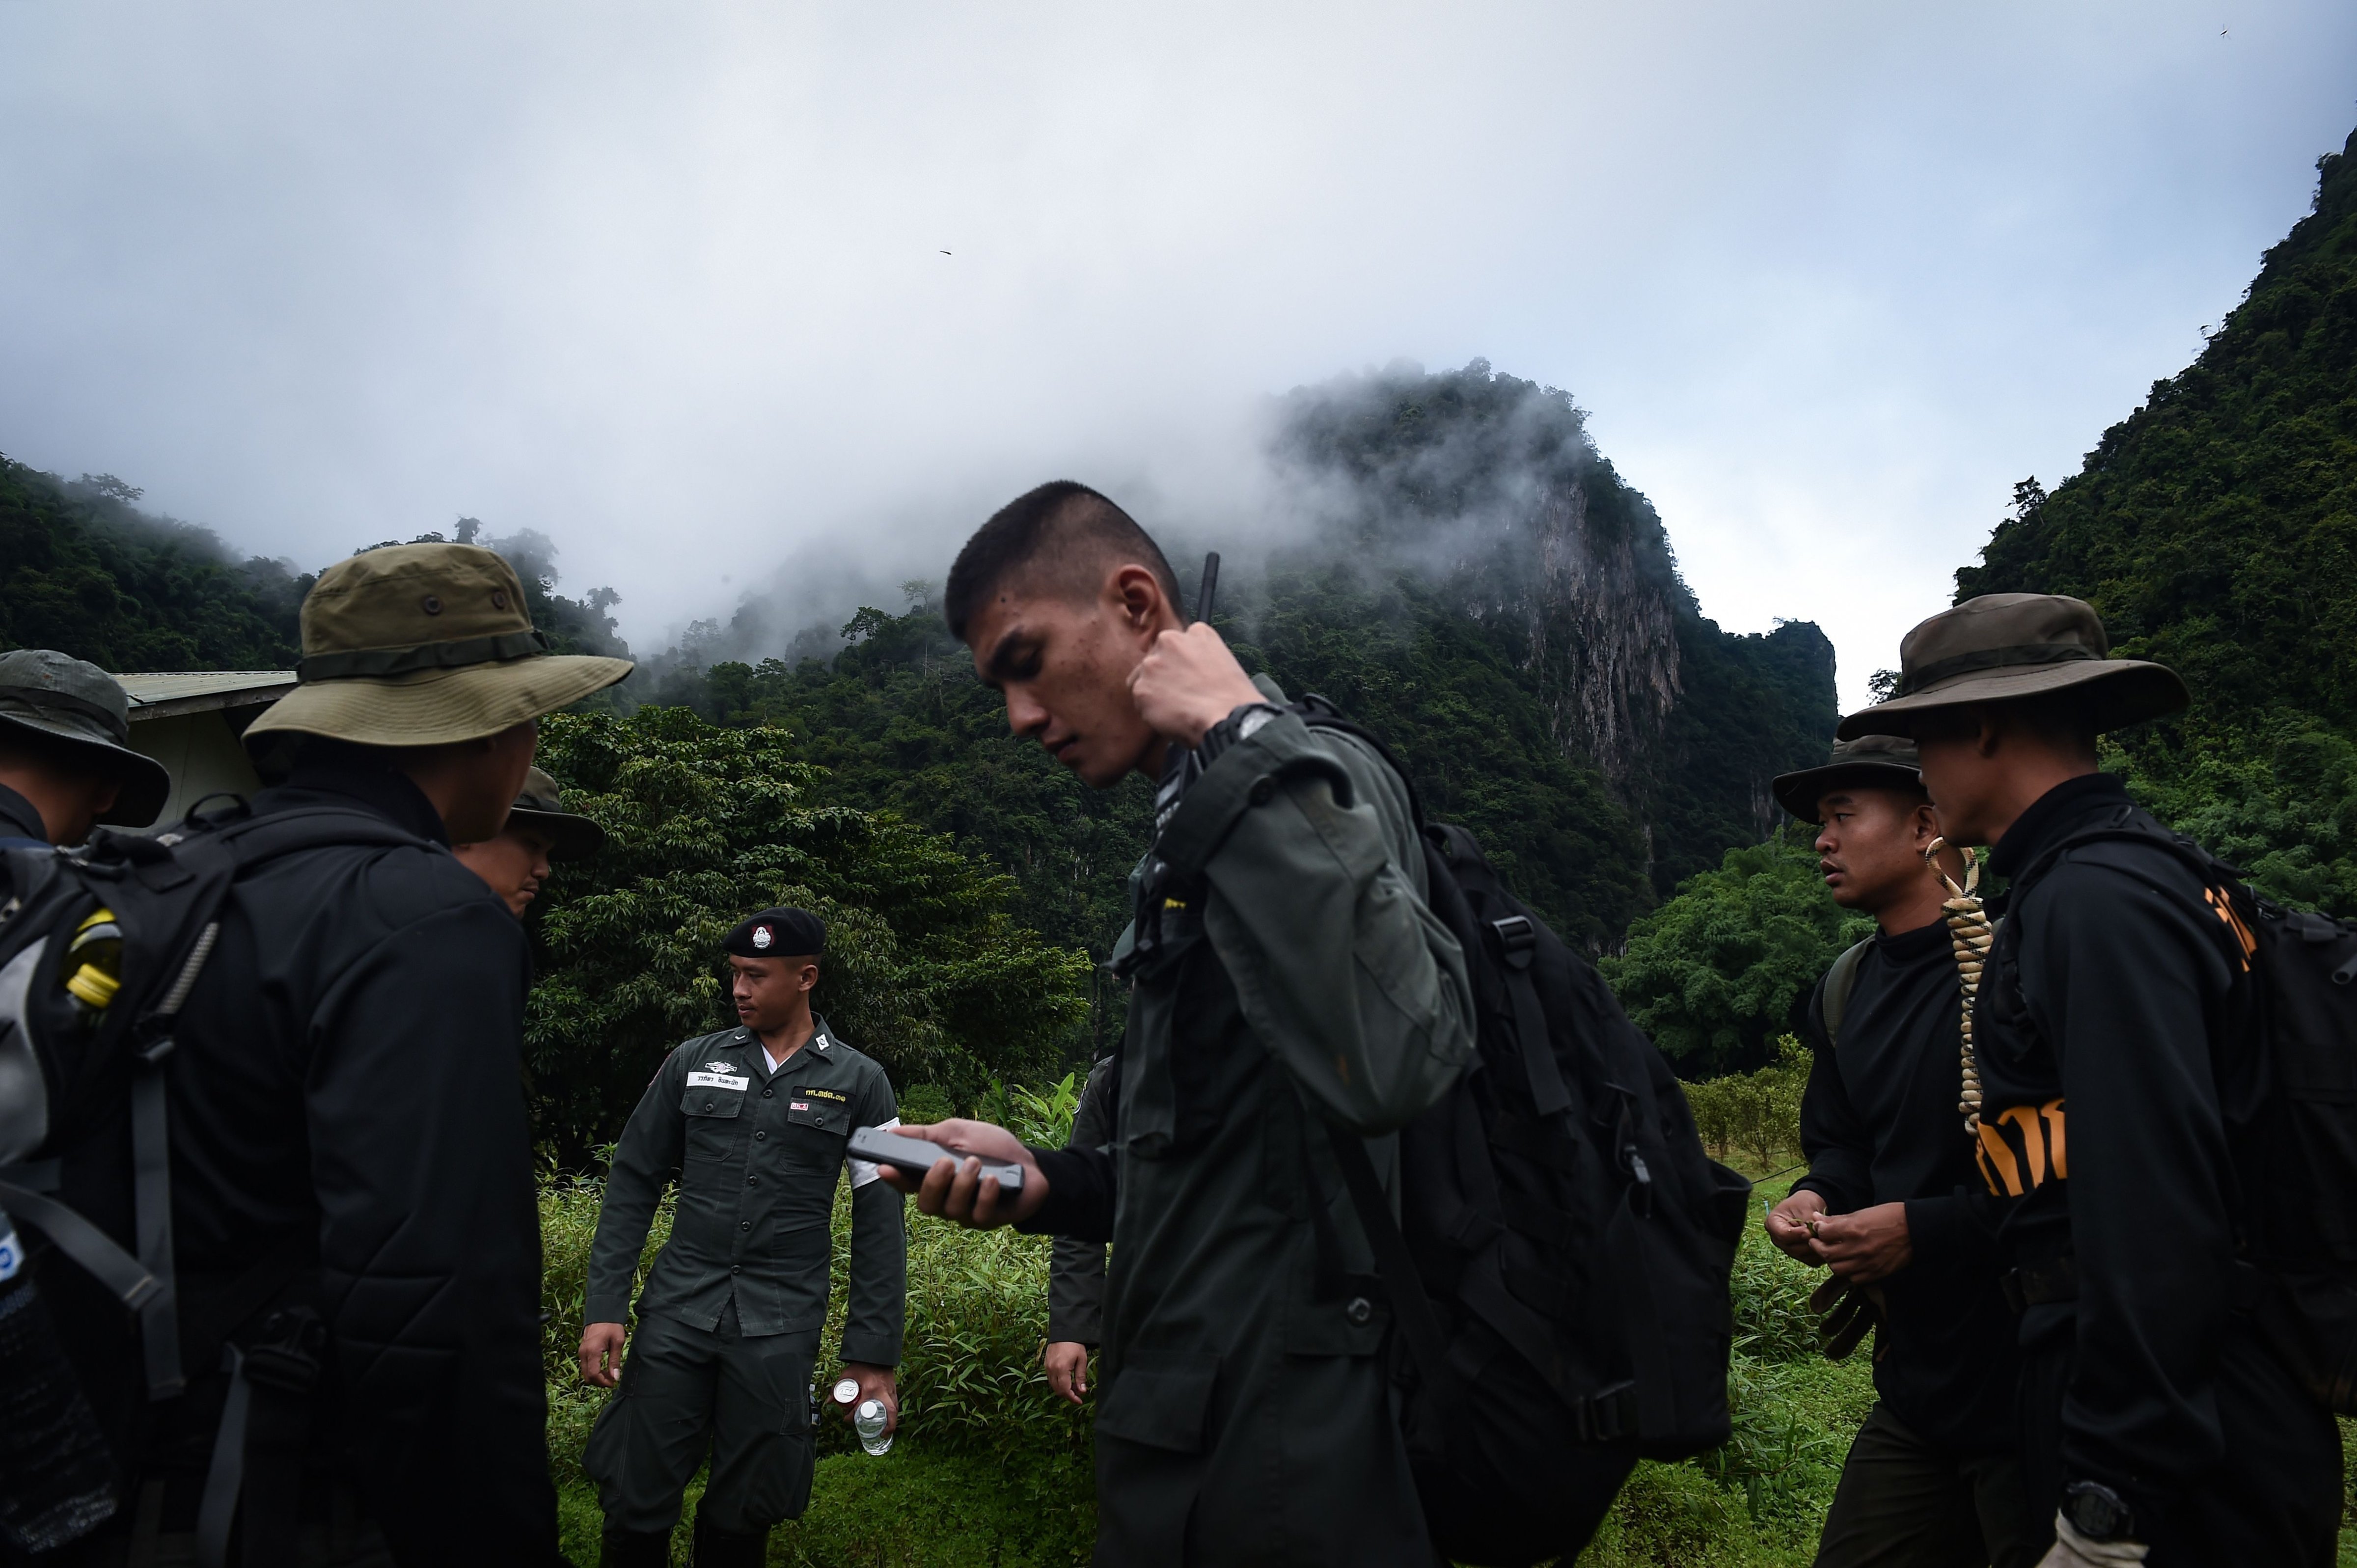 Thai soldiers and police gather in the mountains near the Tham Luang cave at the Khun Nam Nang Non Forest Park in Chiang Rai province on June 30, 2018 as the rescue operation continues for the children of a football team and their coach. (Lillian Suwanrumph—AFP/Getty Images)